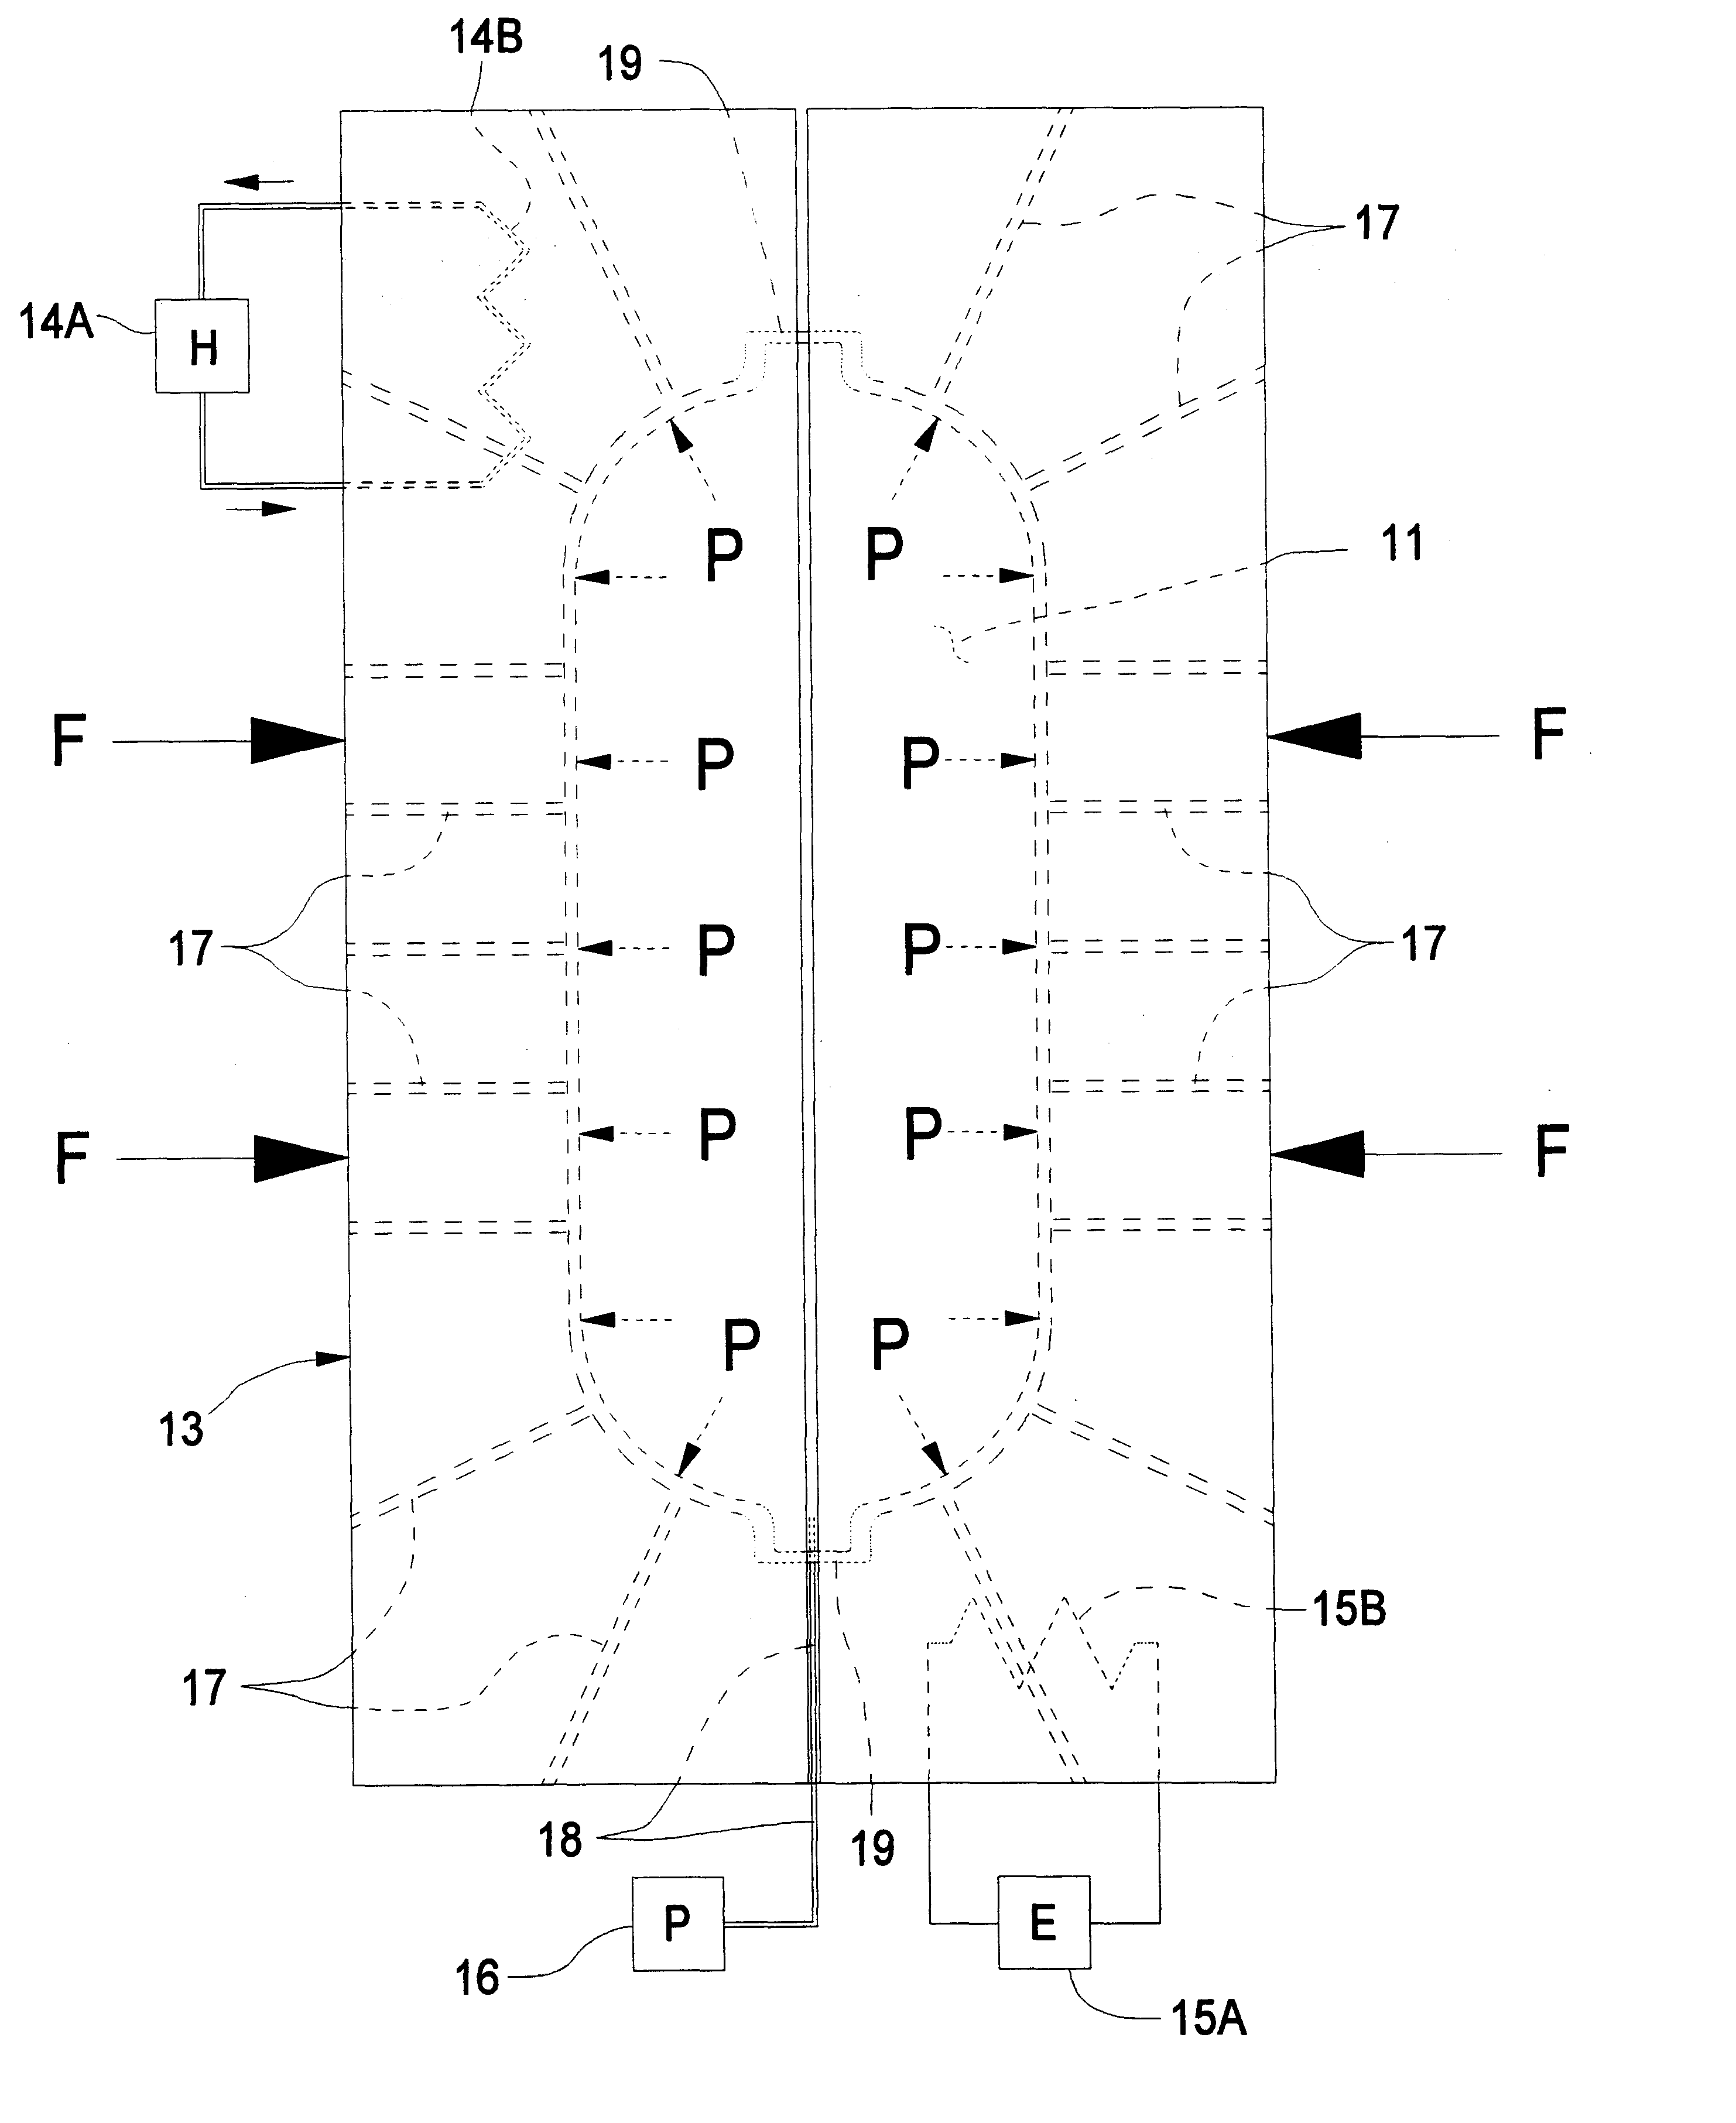 Method for fabricating composite pressure vessels